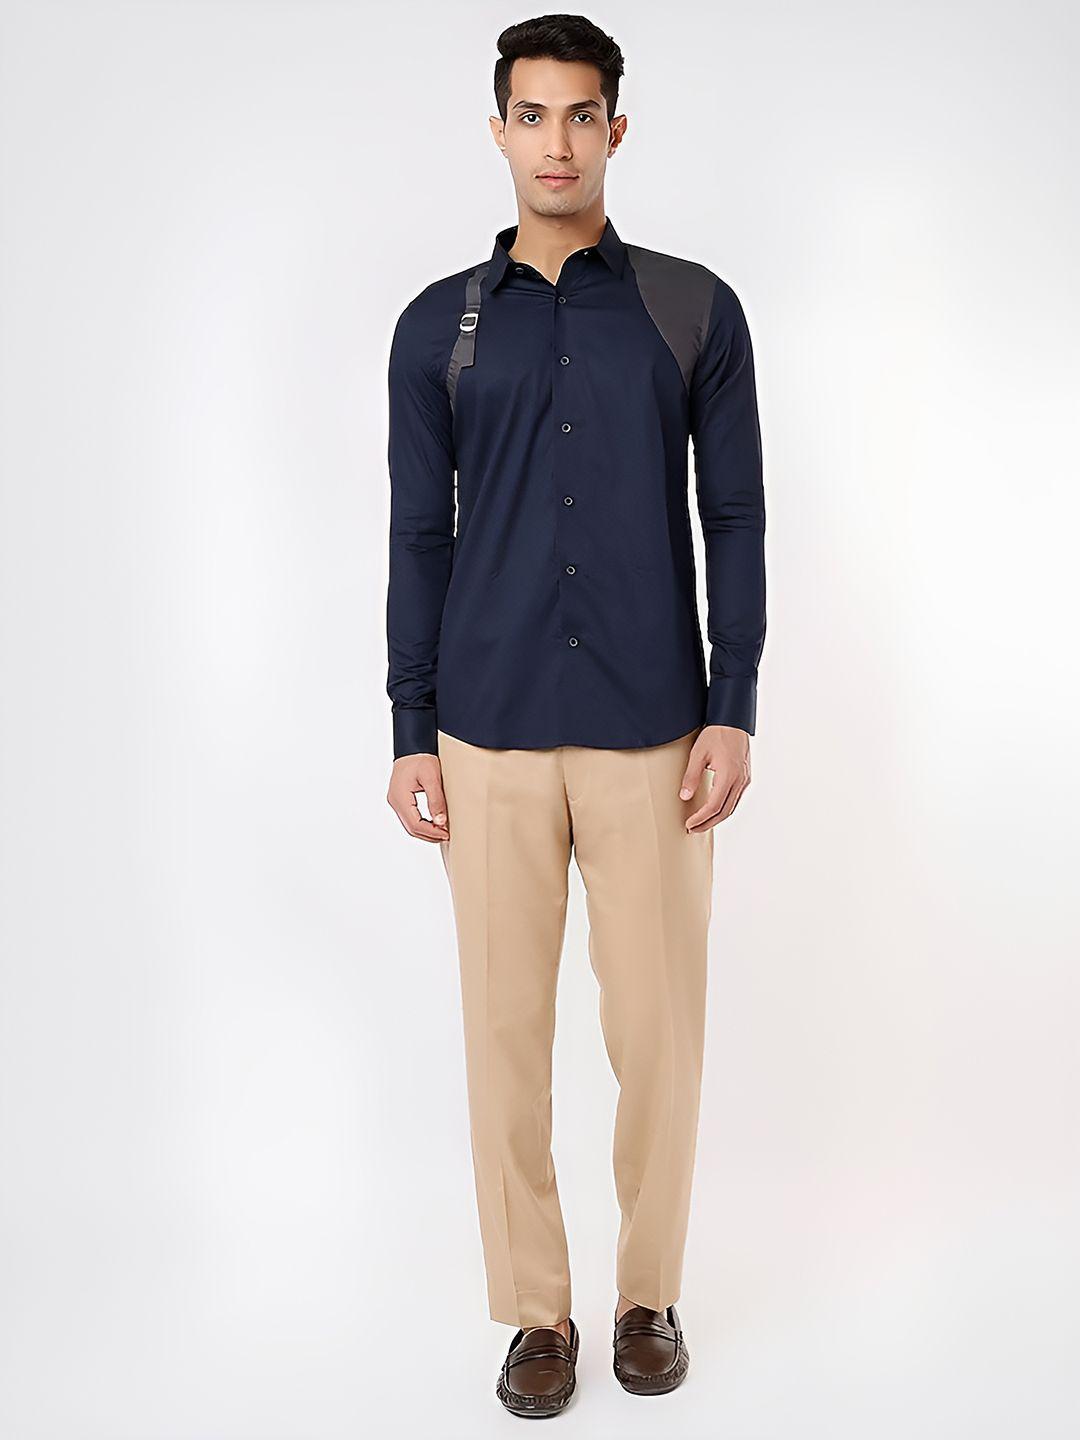 he-spoke-modern-tailored-fit-cotton-casual-shirt